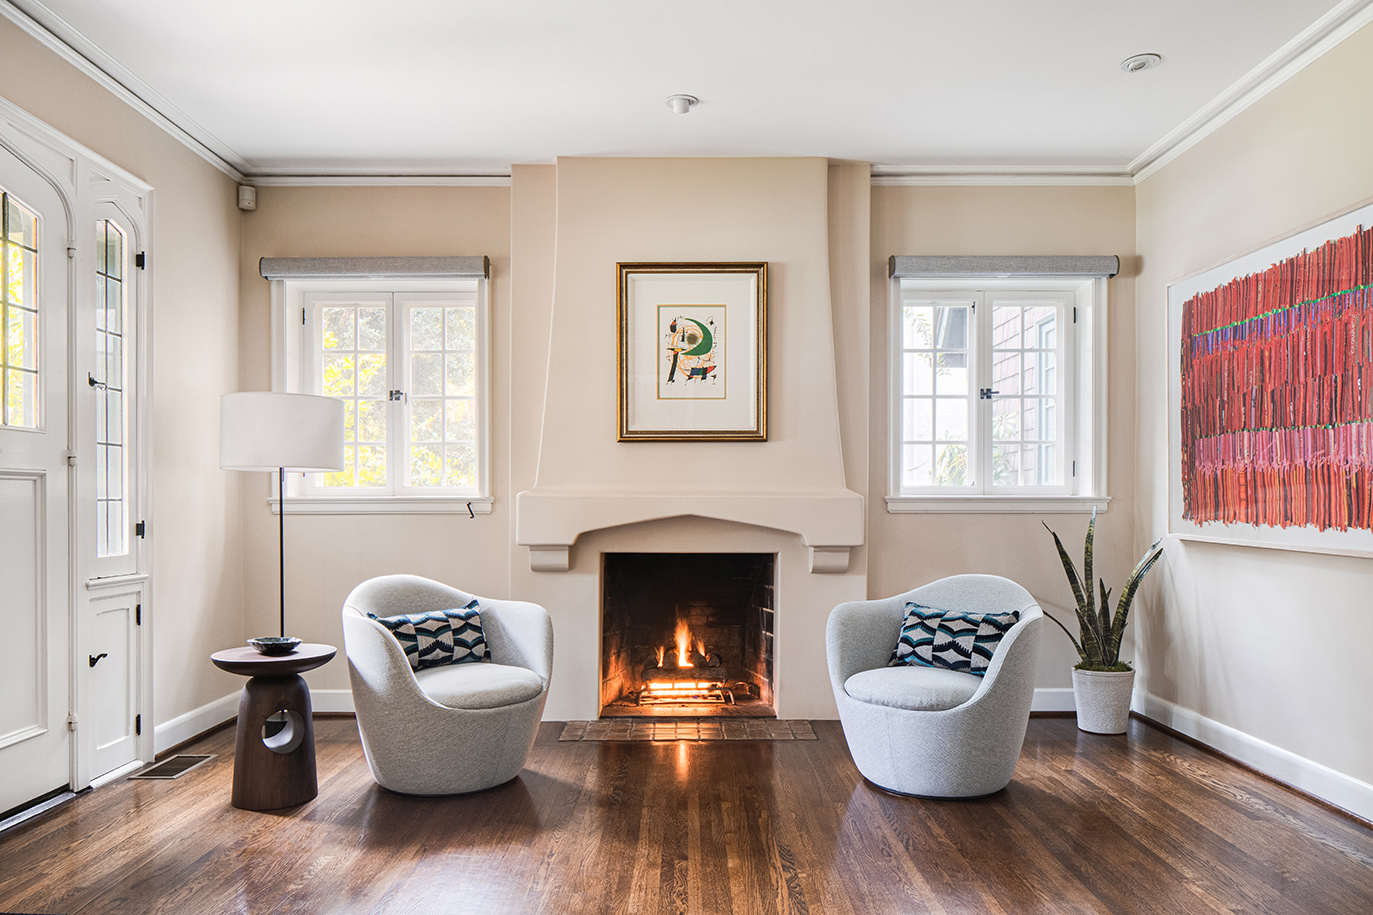 Living room view from an English cottage interior design remodel showcasing two armchairs in front of a fire place